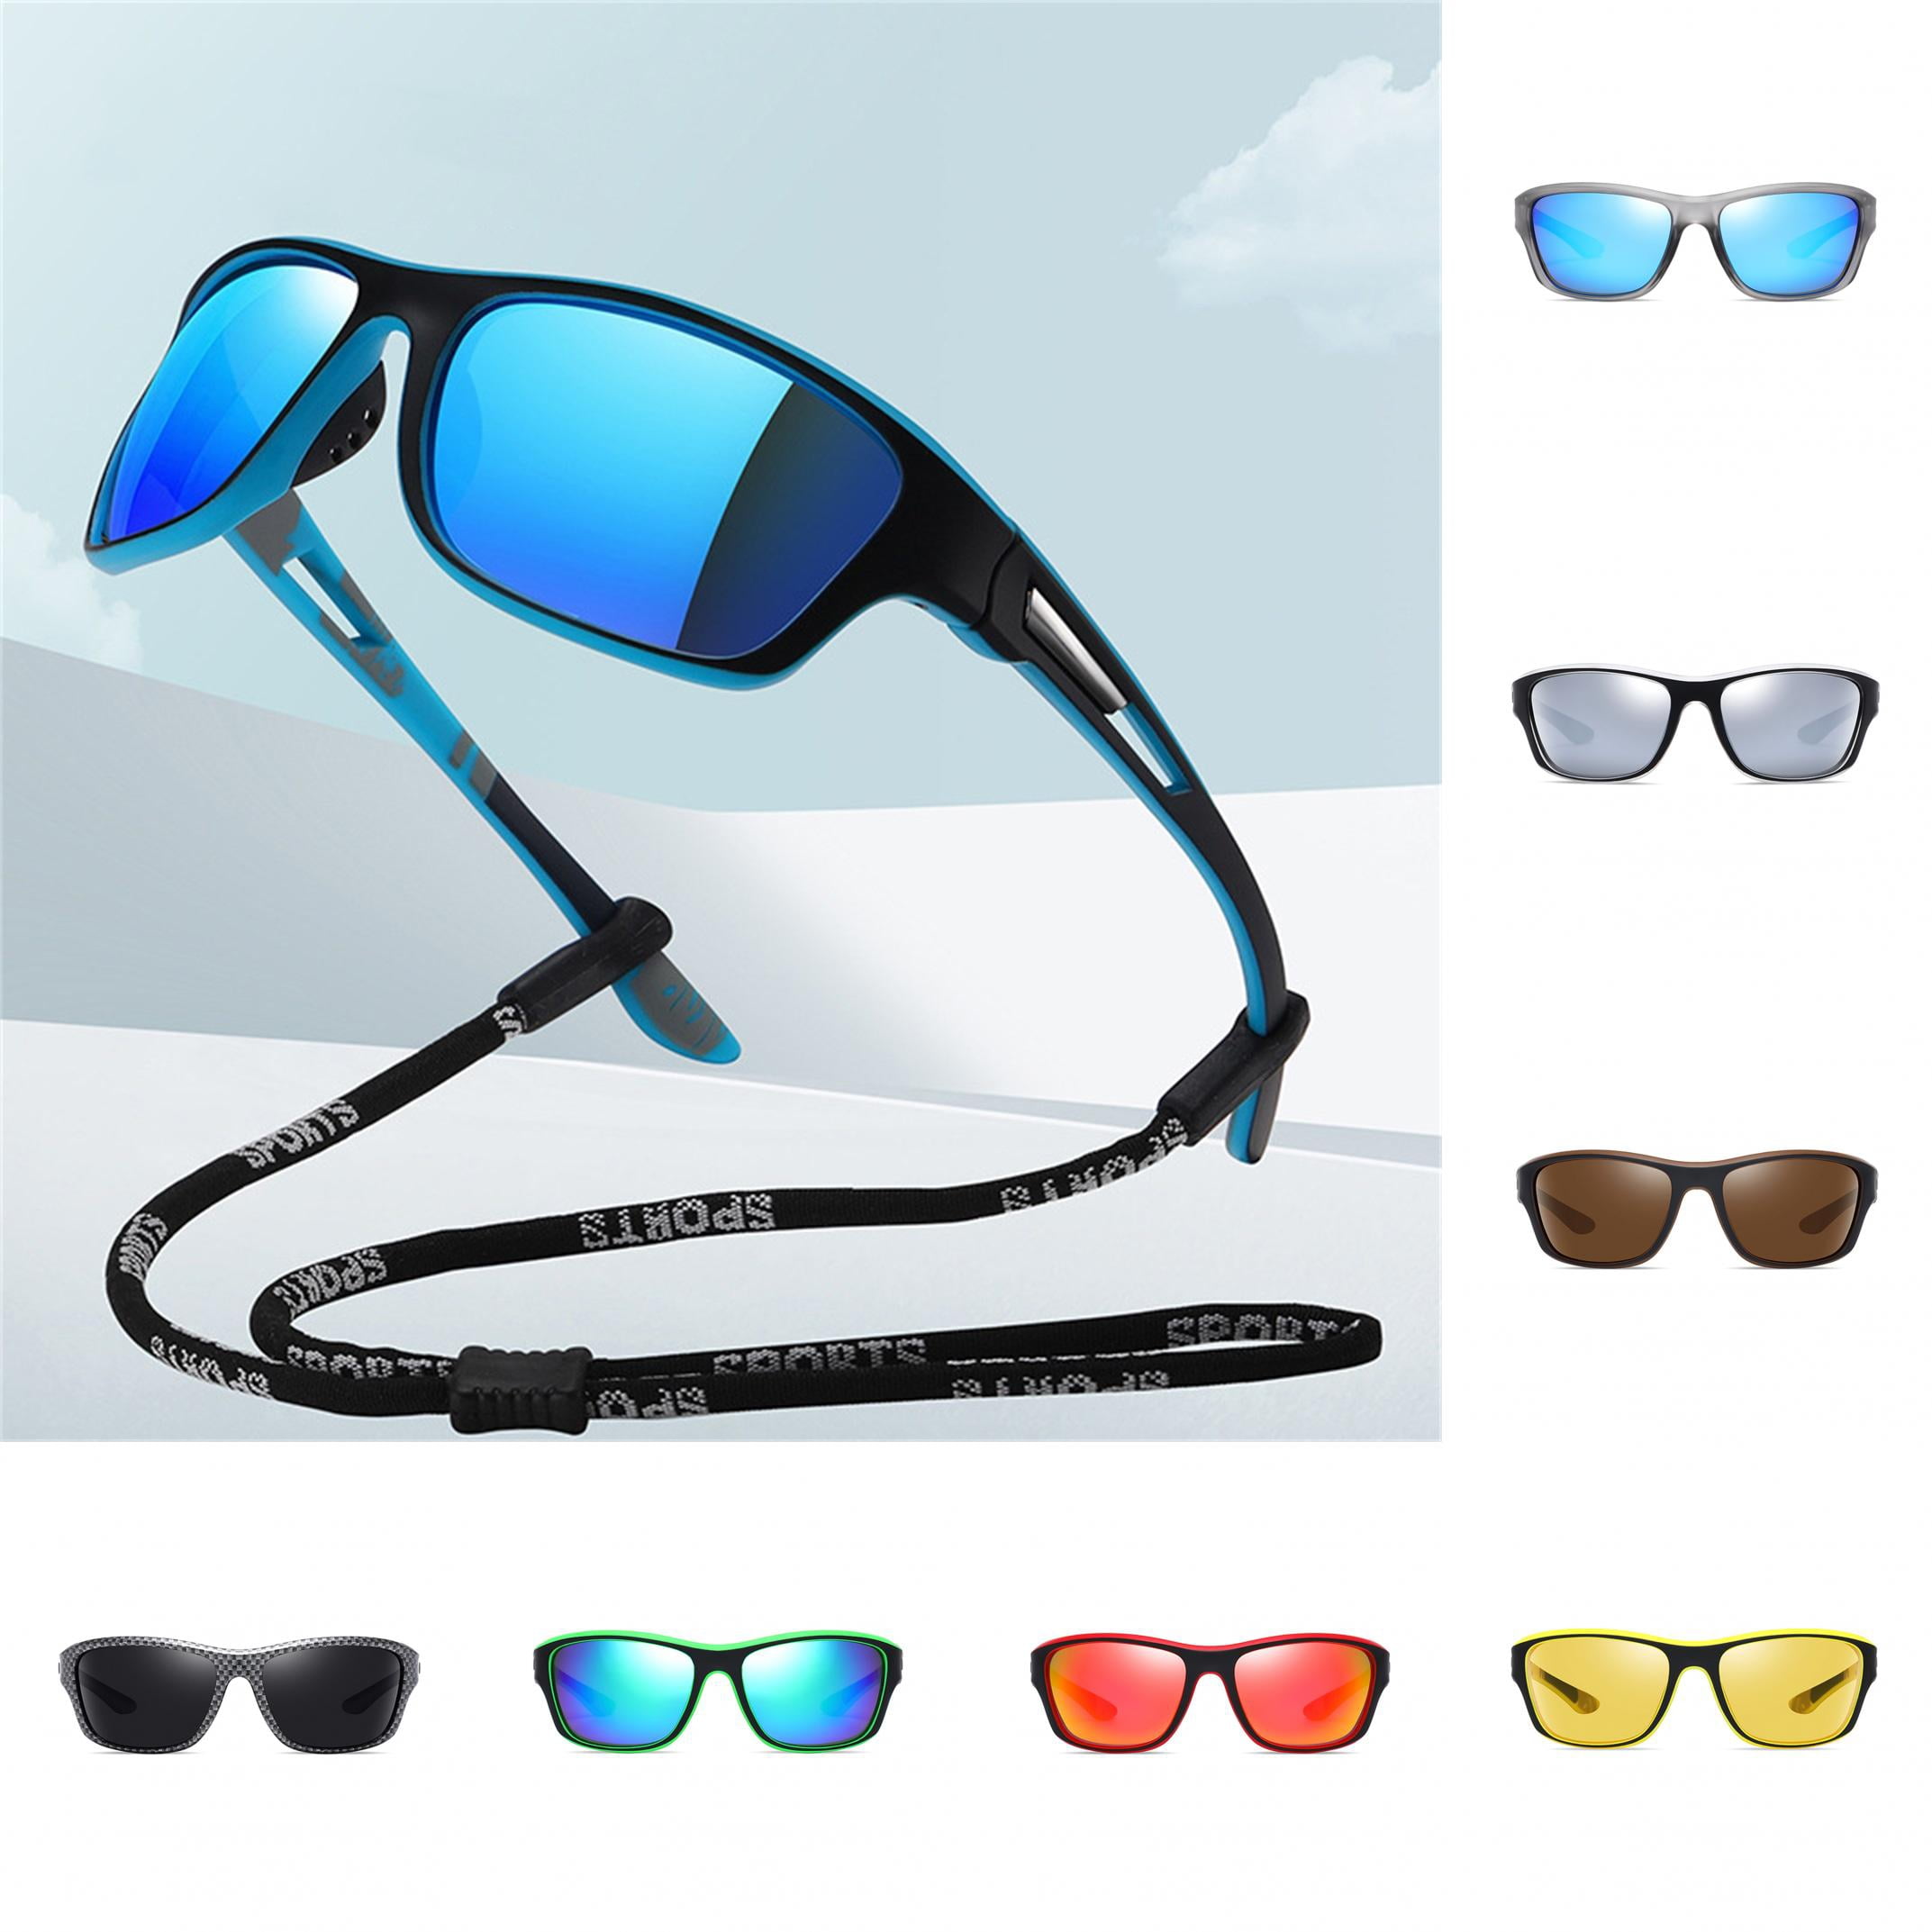 Shenmeida Polarized Solid Construction Sports Sunglasses for Driving  Cycling Fishing Sun Glasses UV Protection Goggles